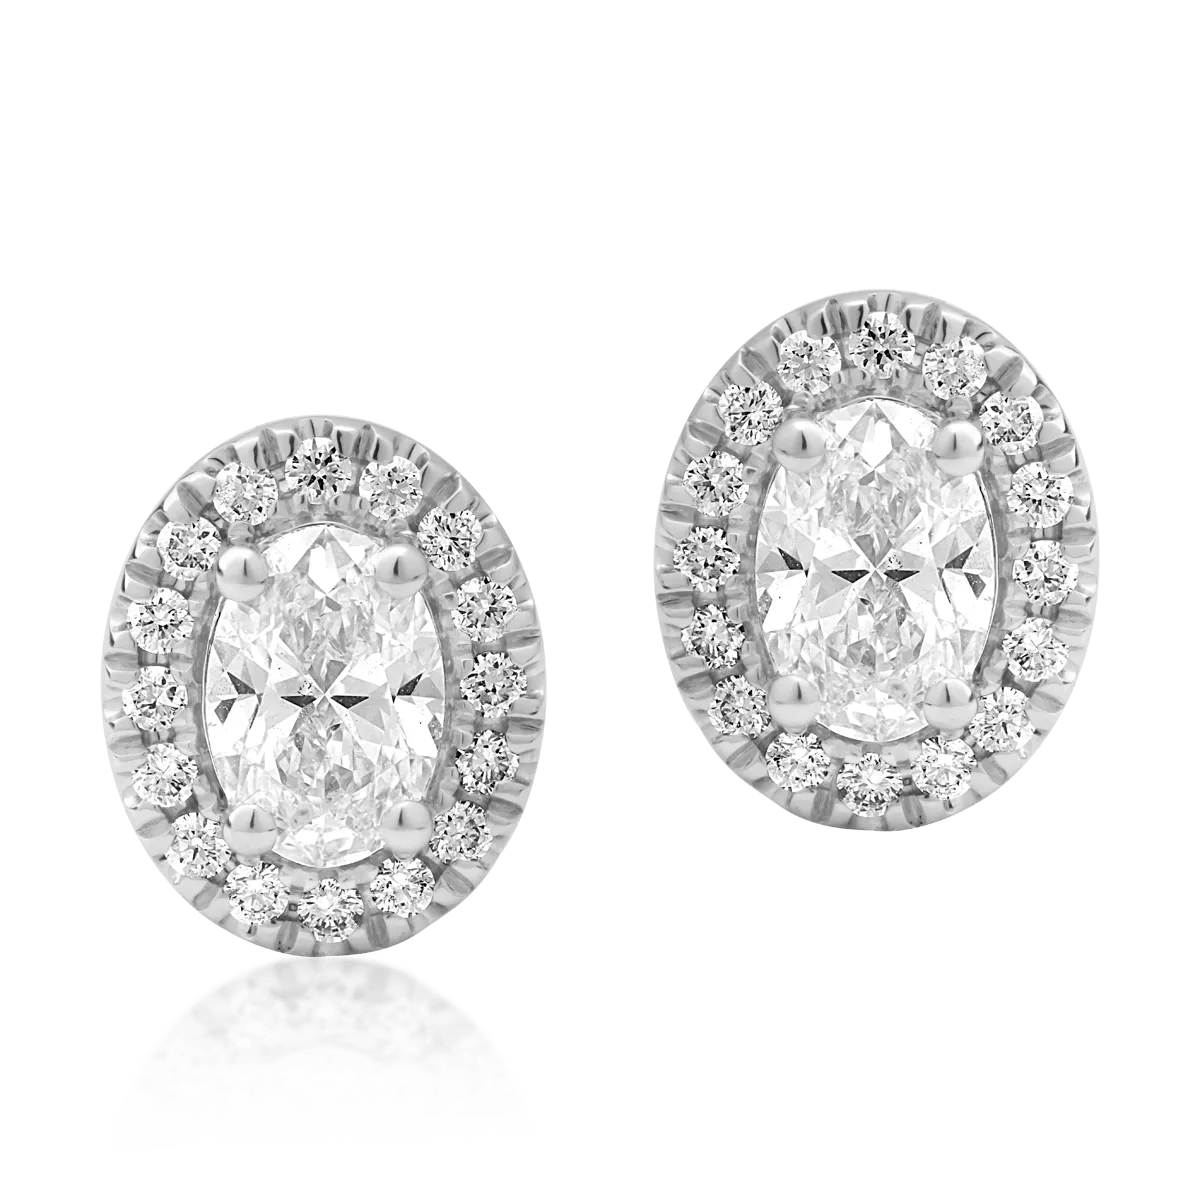 18K white gold earrings with 0.8ct diamonds and 0.189ct diamonds